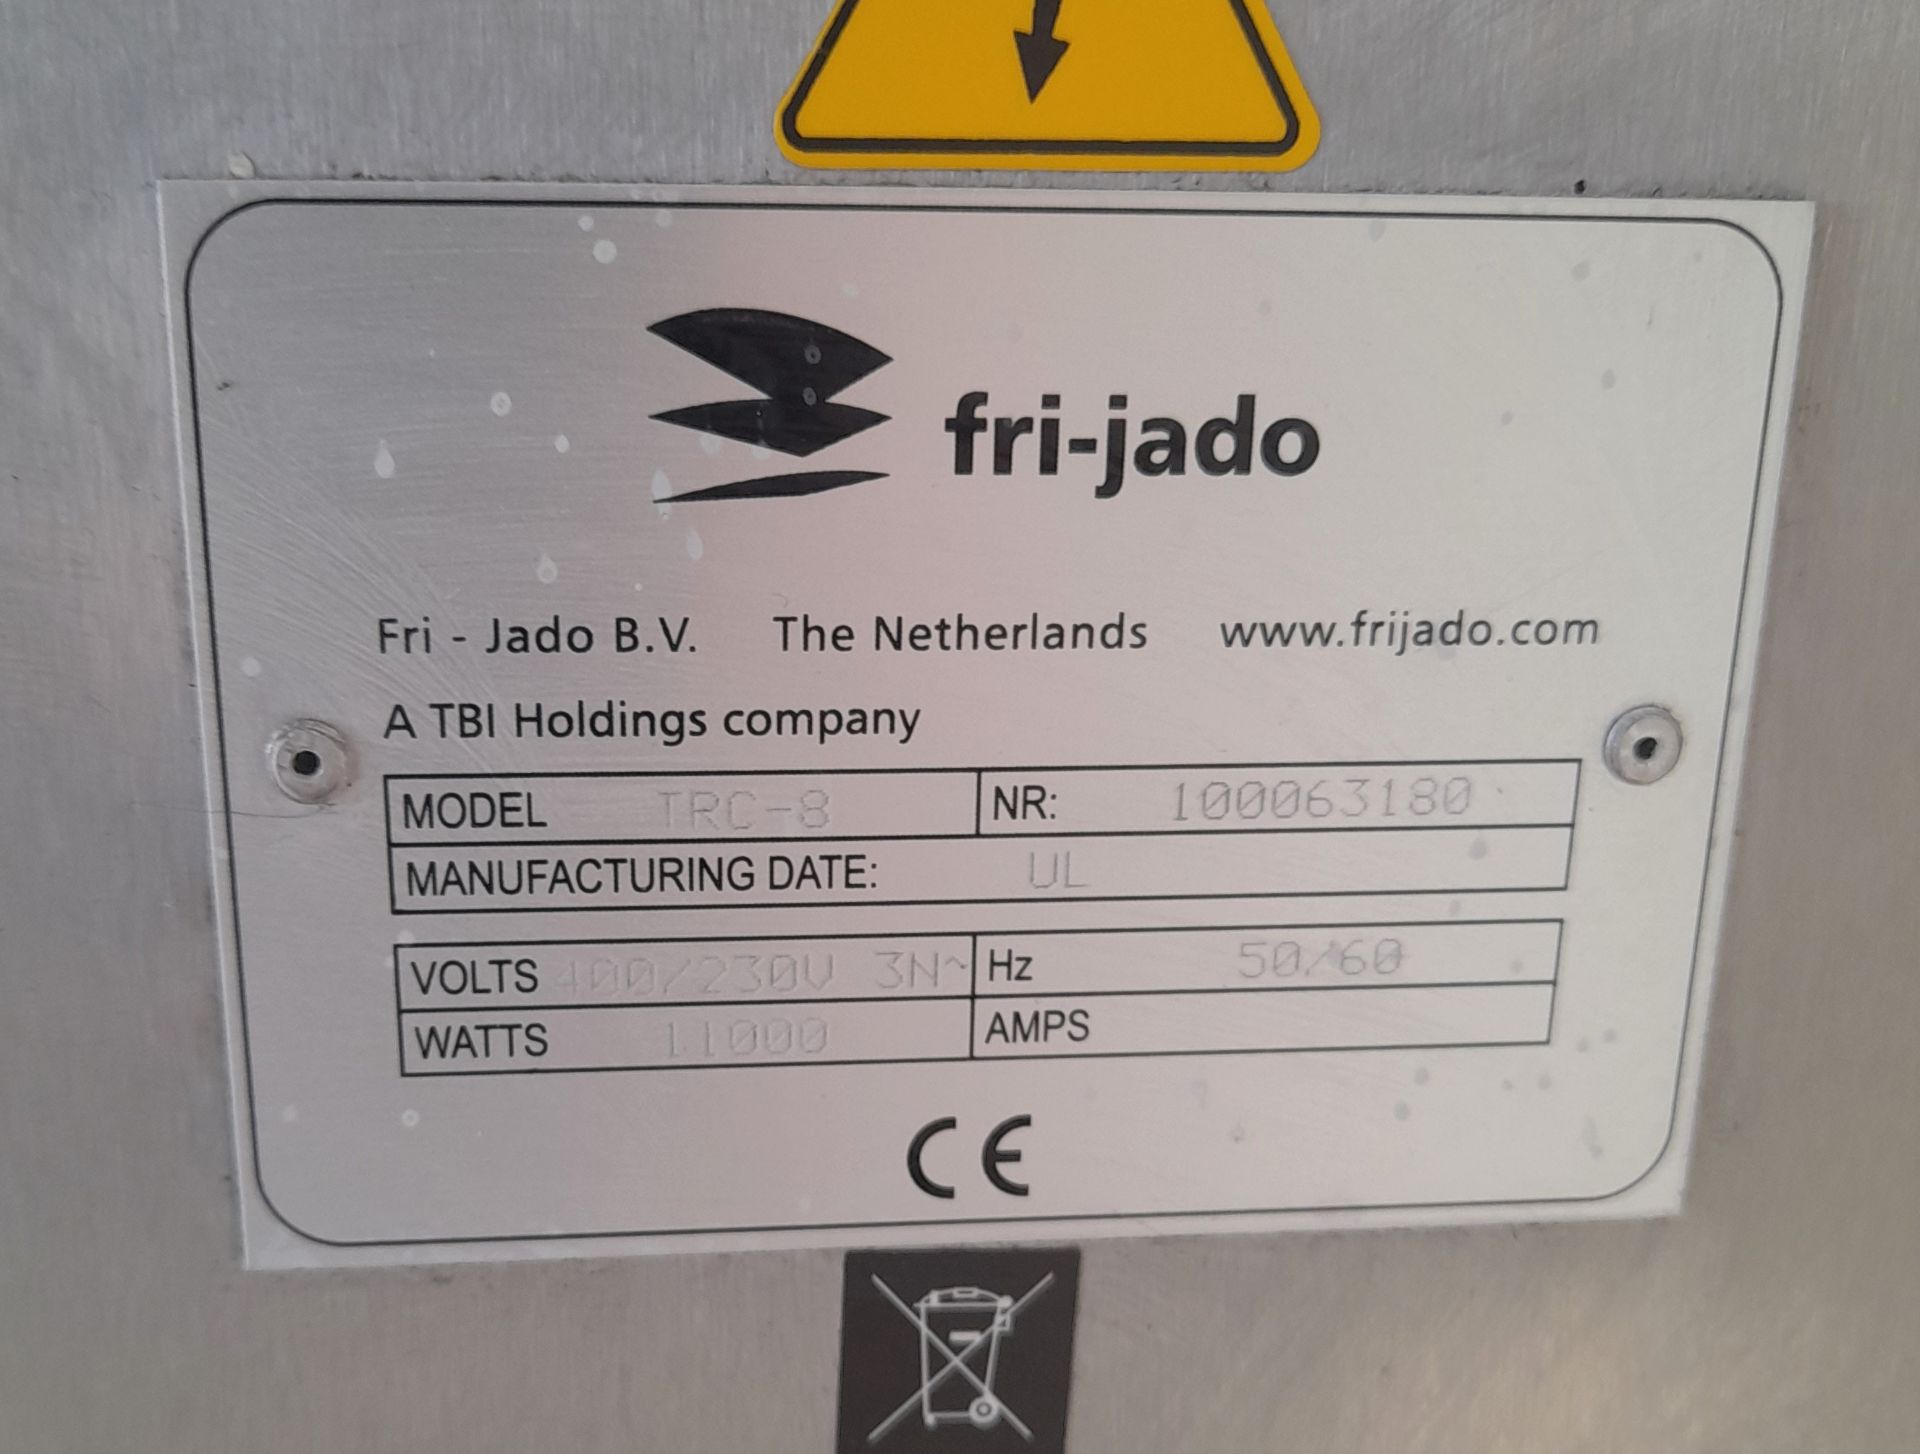 1 x Fri-Jado Turbo Retail 8 Grid Combi Oven - 3 Phase Combi Oven With Various Cooking Programs - Image 2 of 24